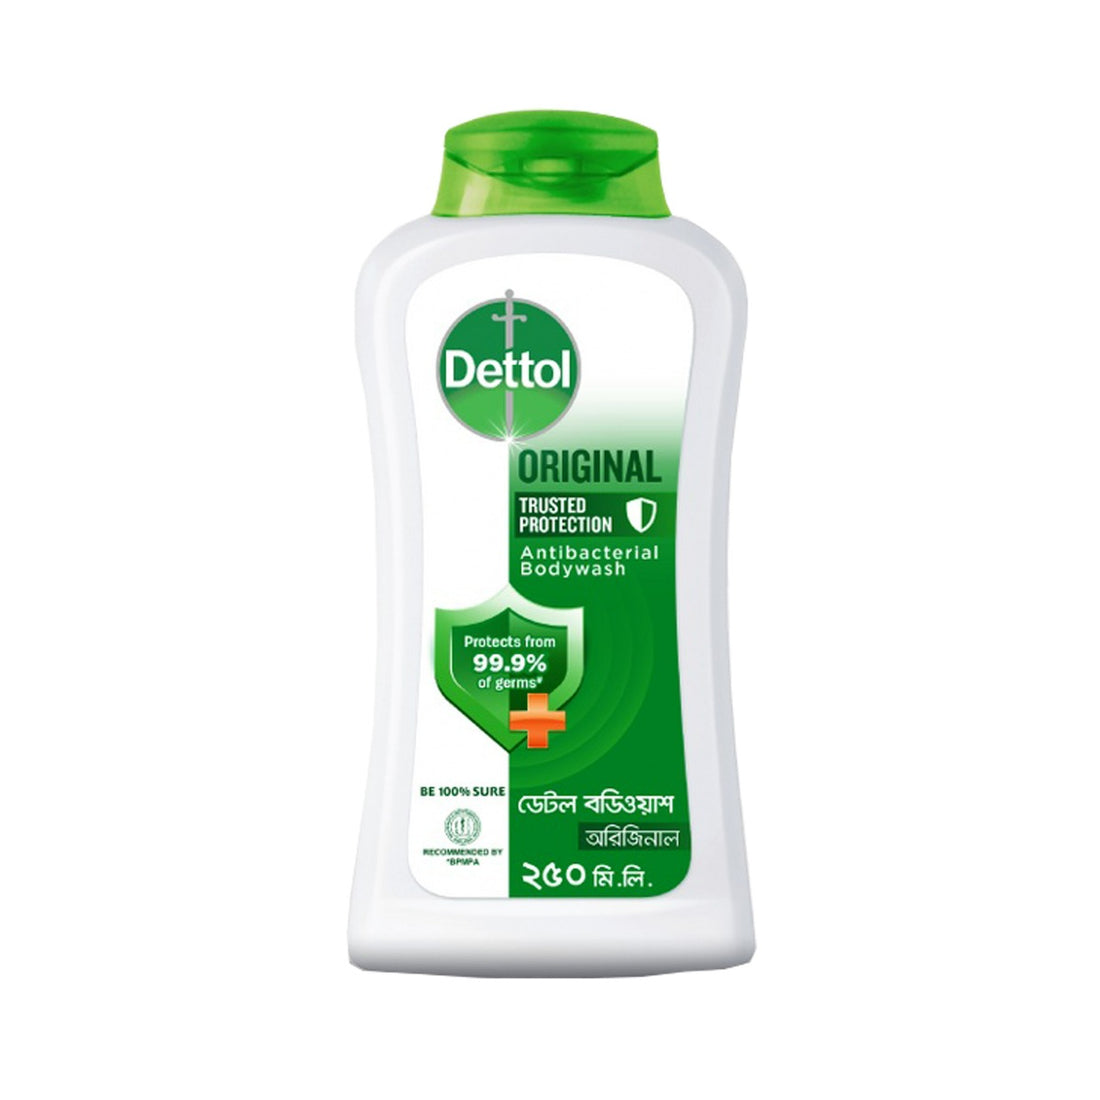 Dettol Body Wash Shower Gel Original Pine Fragrance with Trusted Protection (250ml)